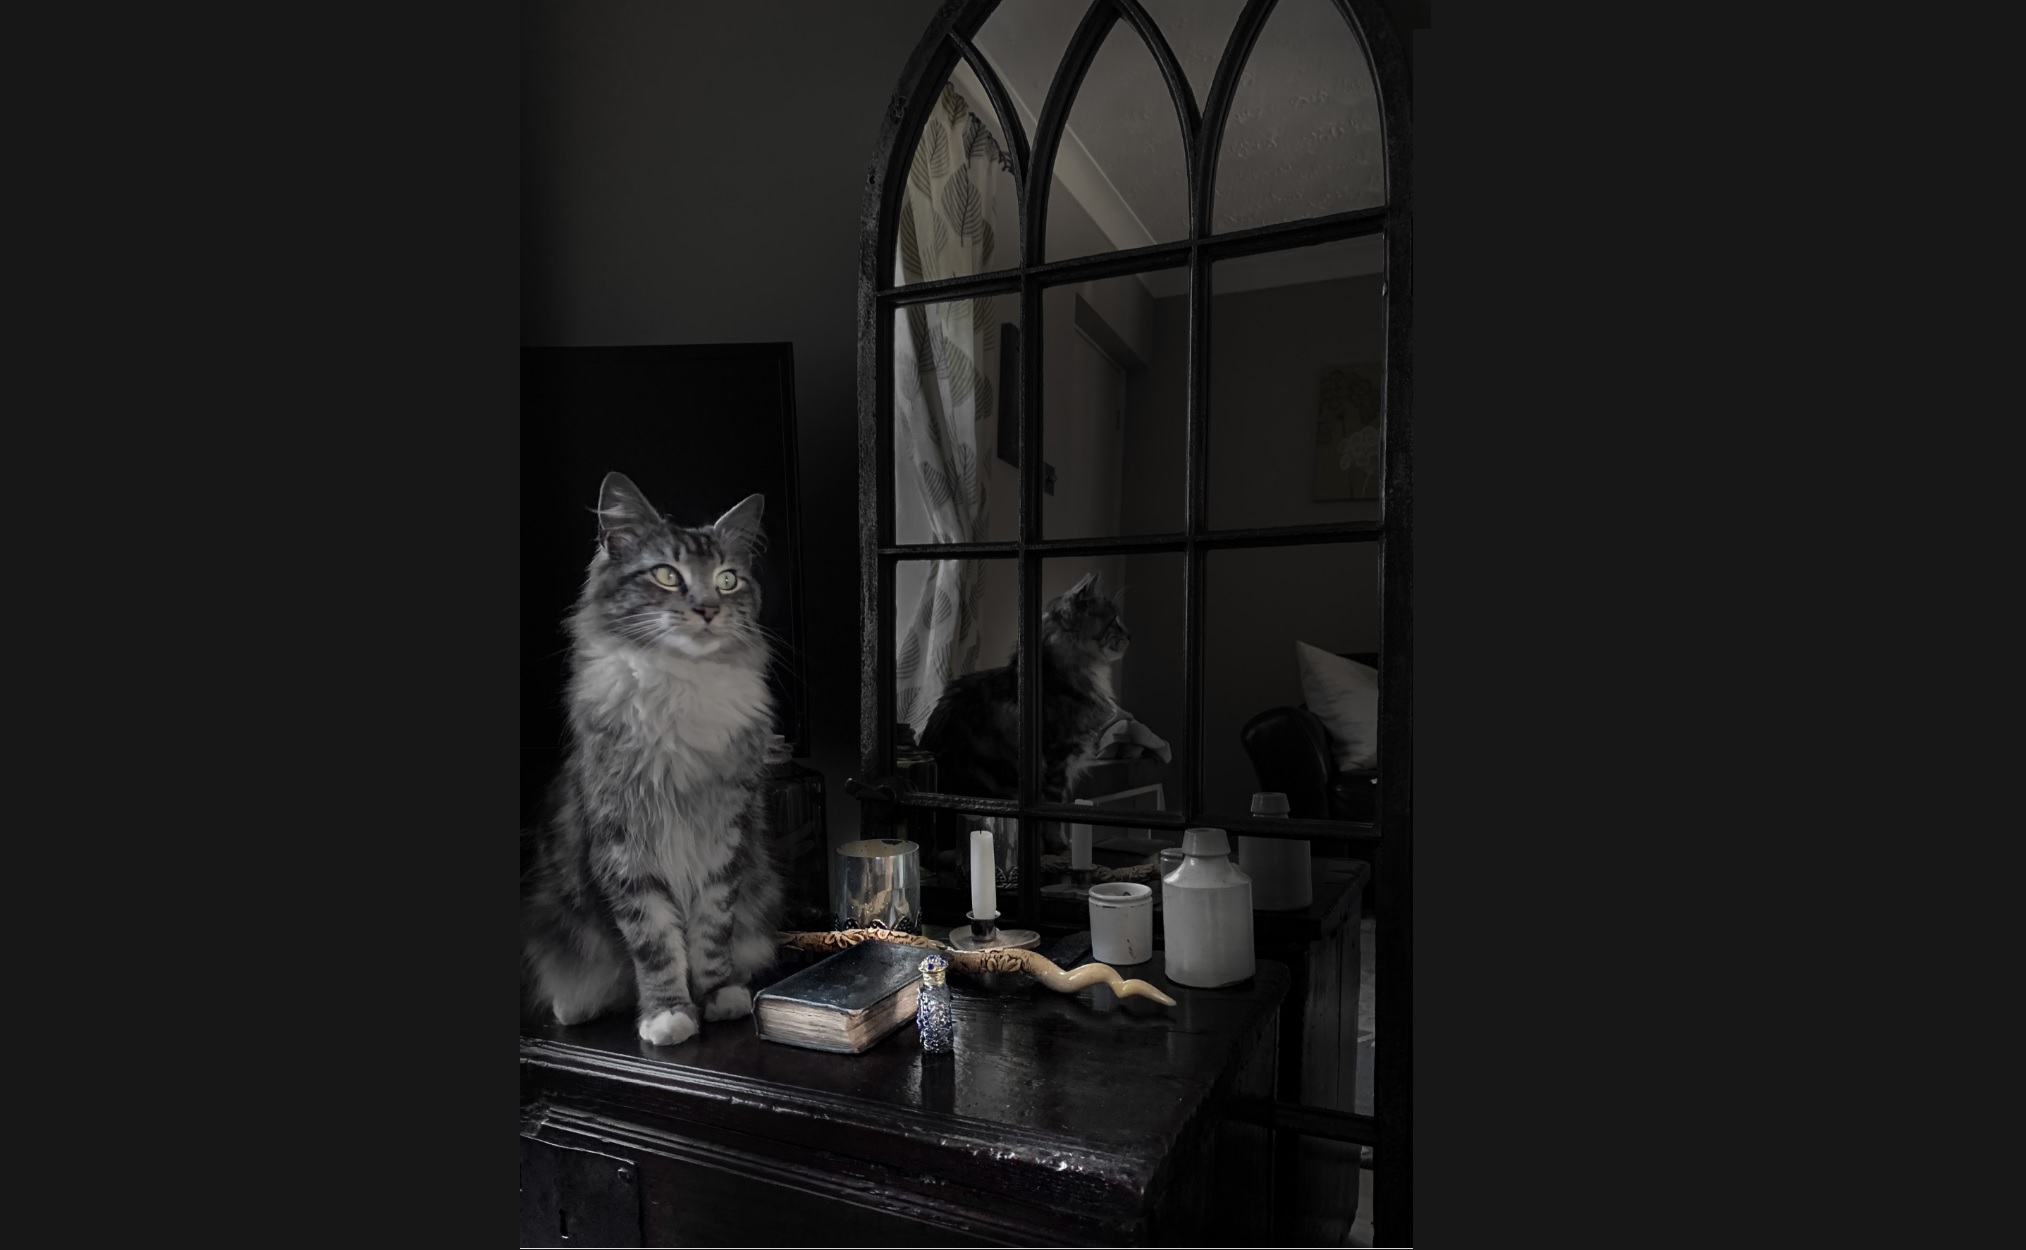 Photo Competion Winner Halloween 2020, featuring Antique Cast Iron Window Converted To a Mirror 